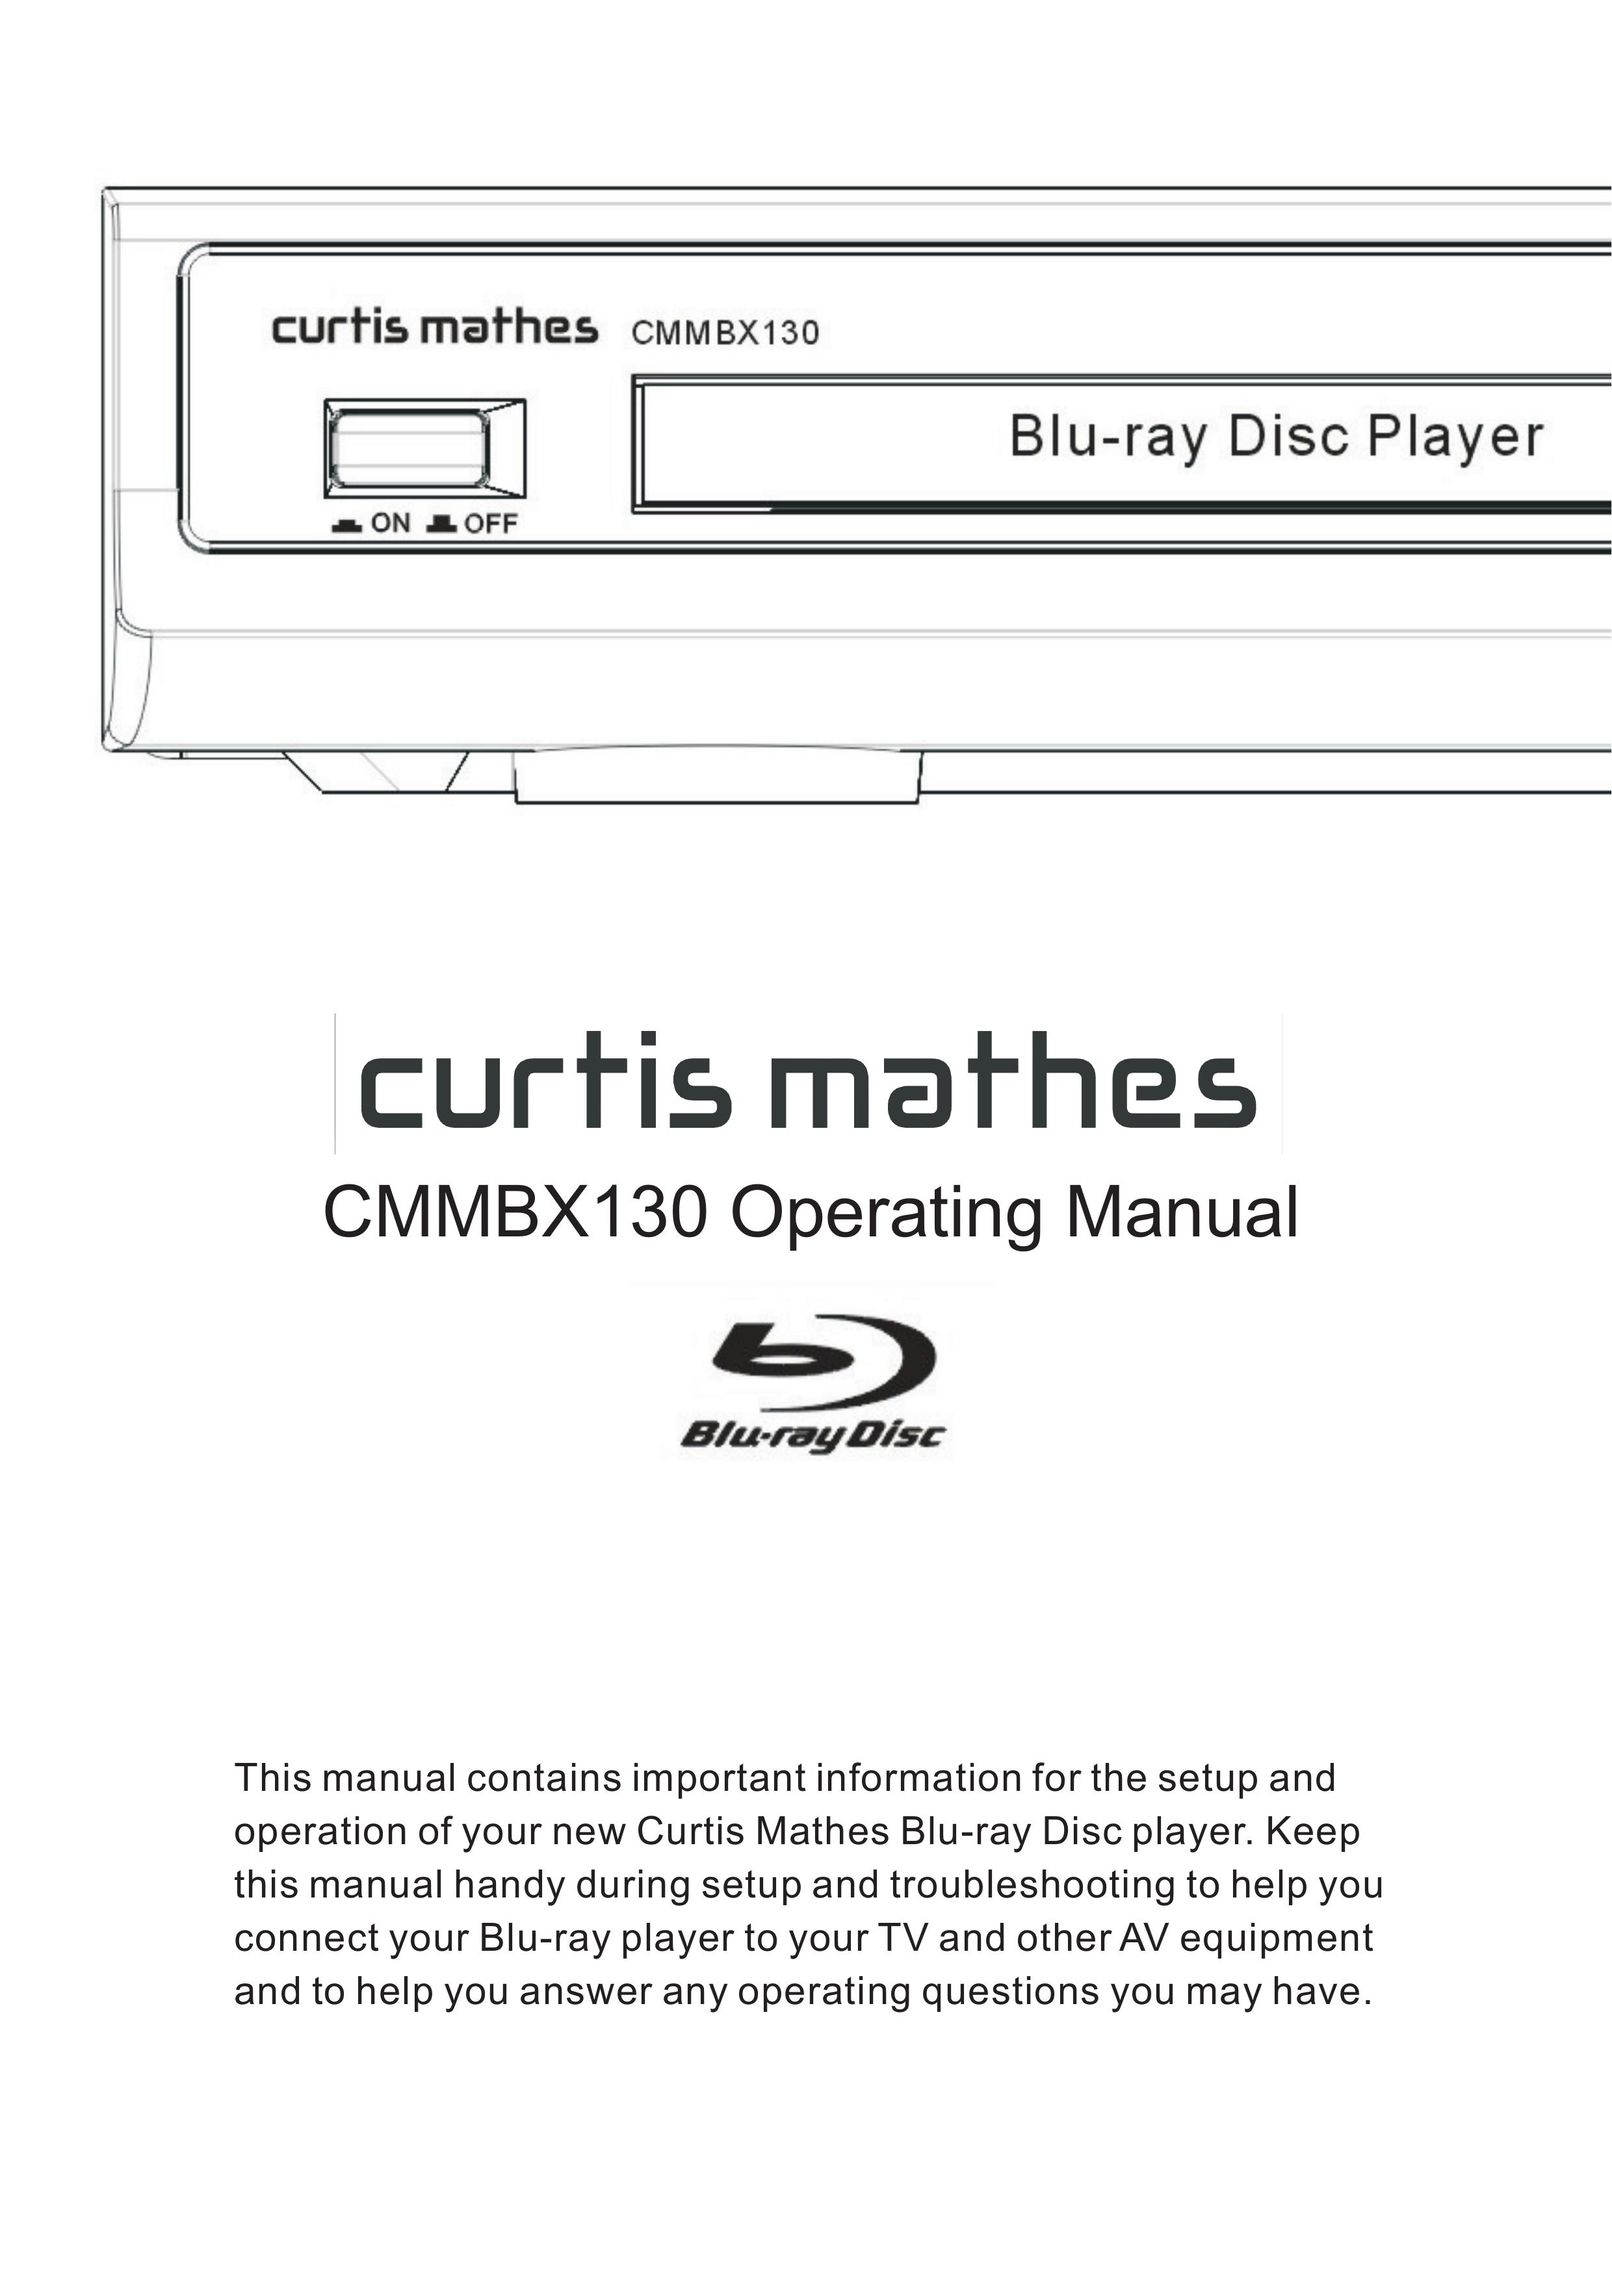 Curtis Mathes CMMBX130 Blu-ray Player User Manual (Page 1)